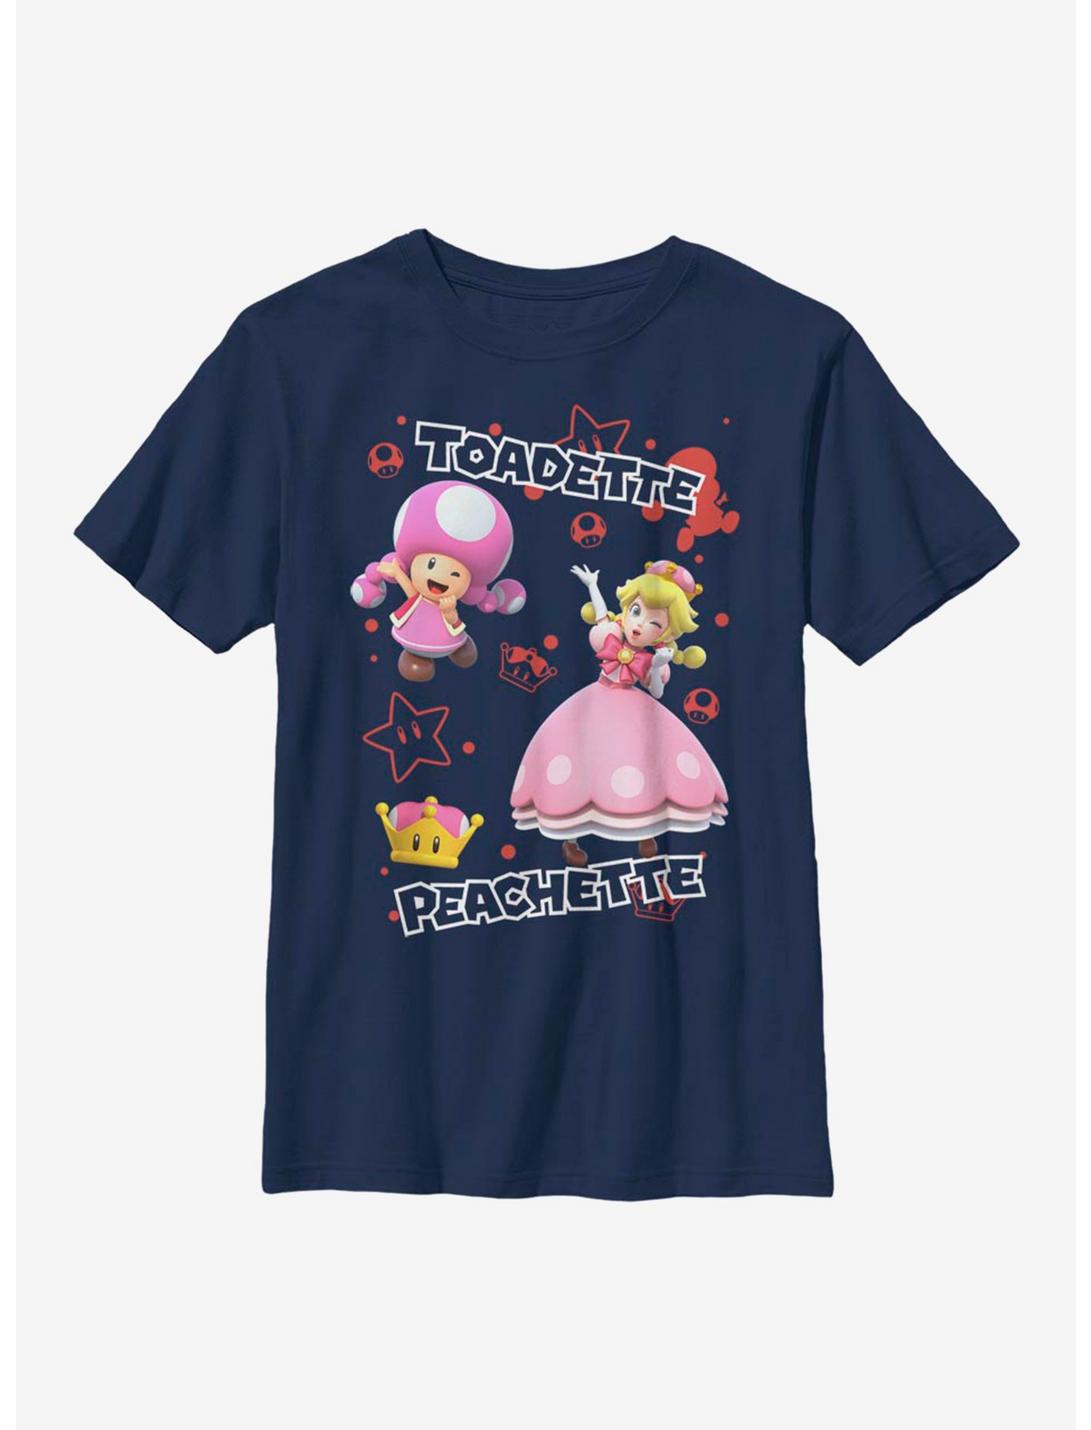 Nintendo Super Mario Toadette and Peachette Youth T-Shirt, NAVY, hi-res